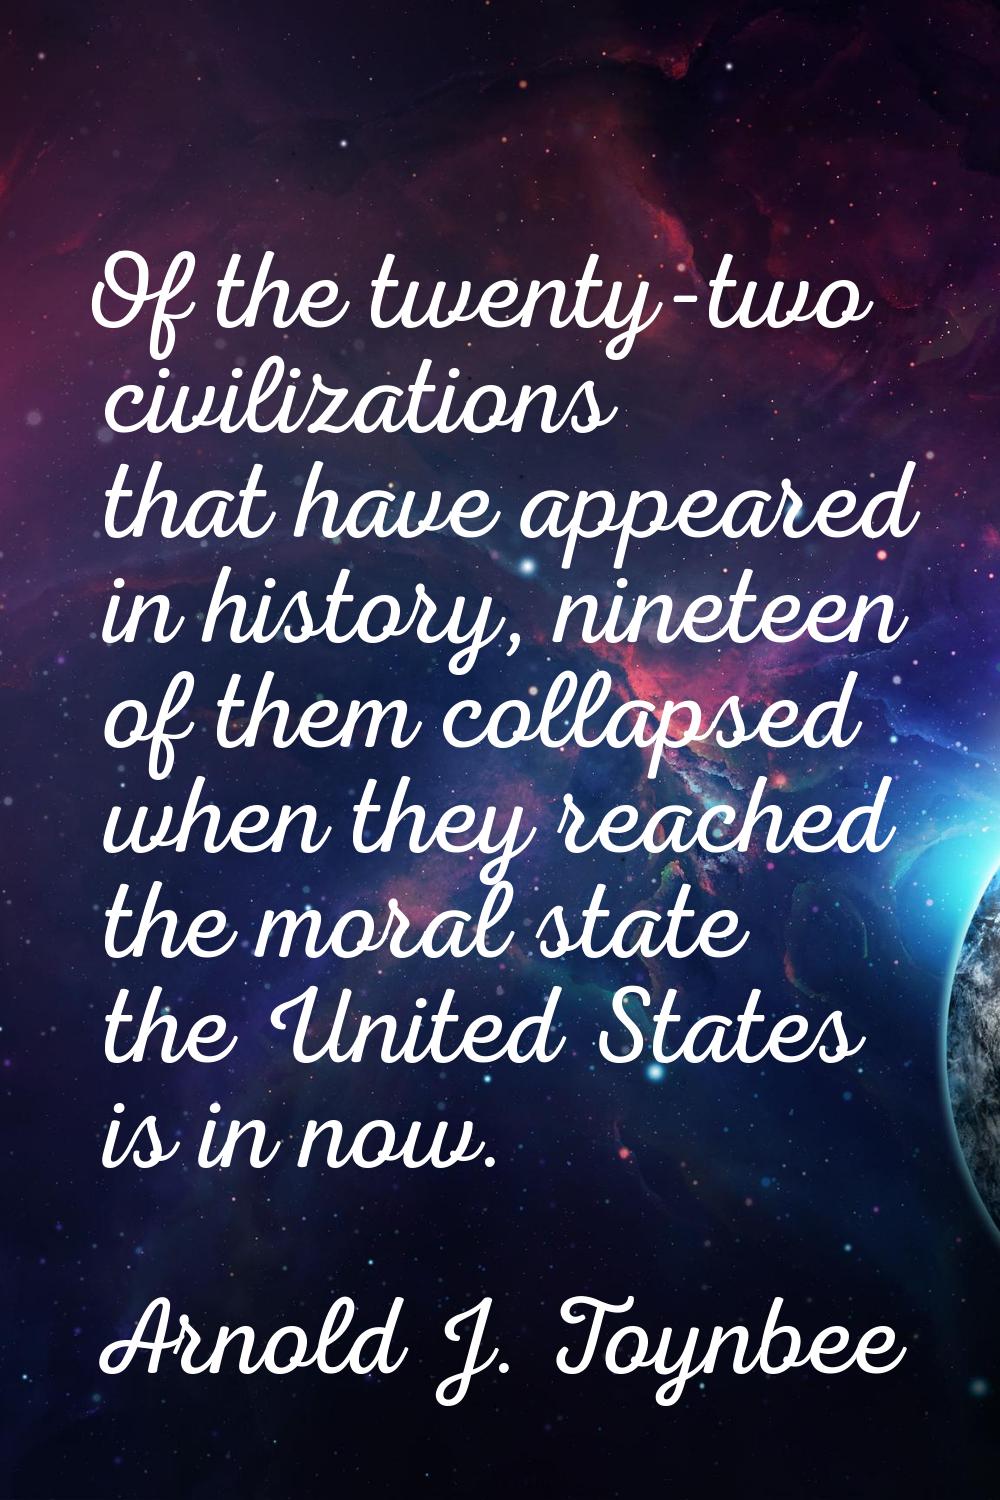 Of the twenty-two civilizations that have appeared in history, nineteen of them collapsed when they